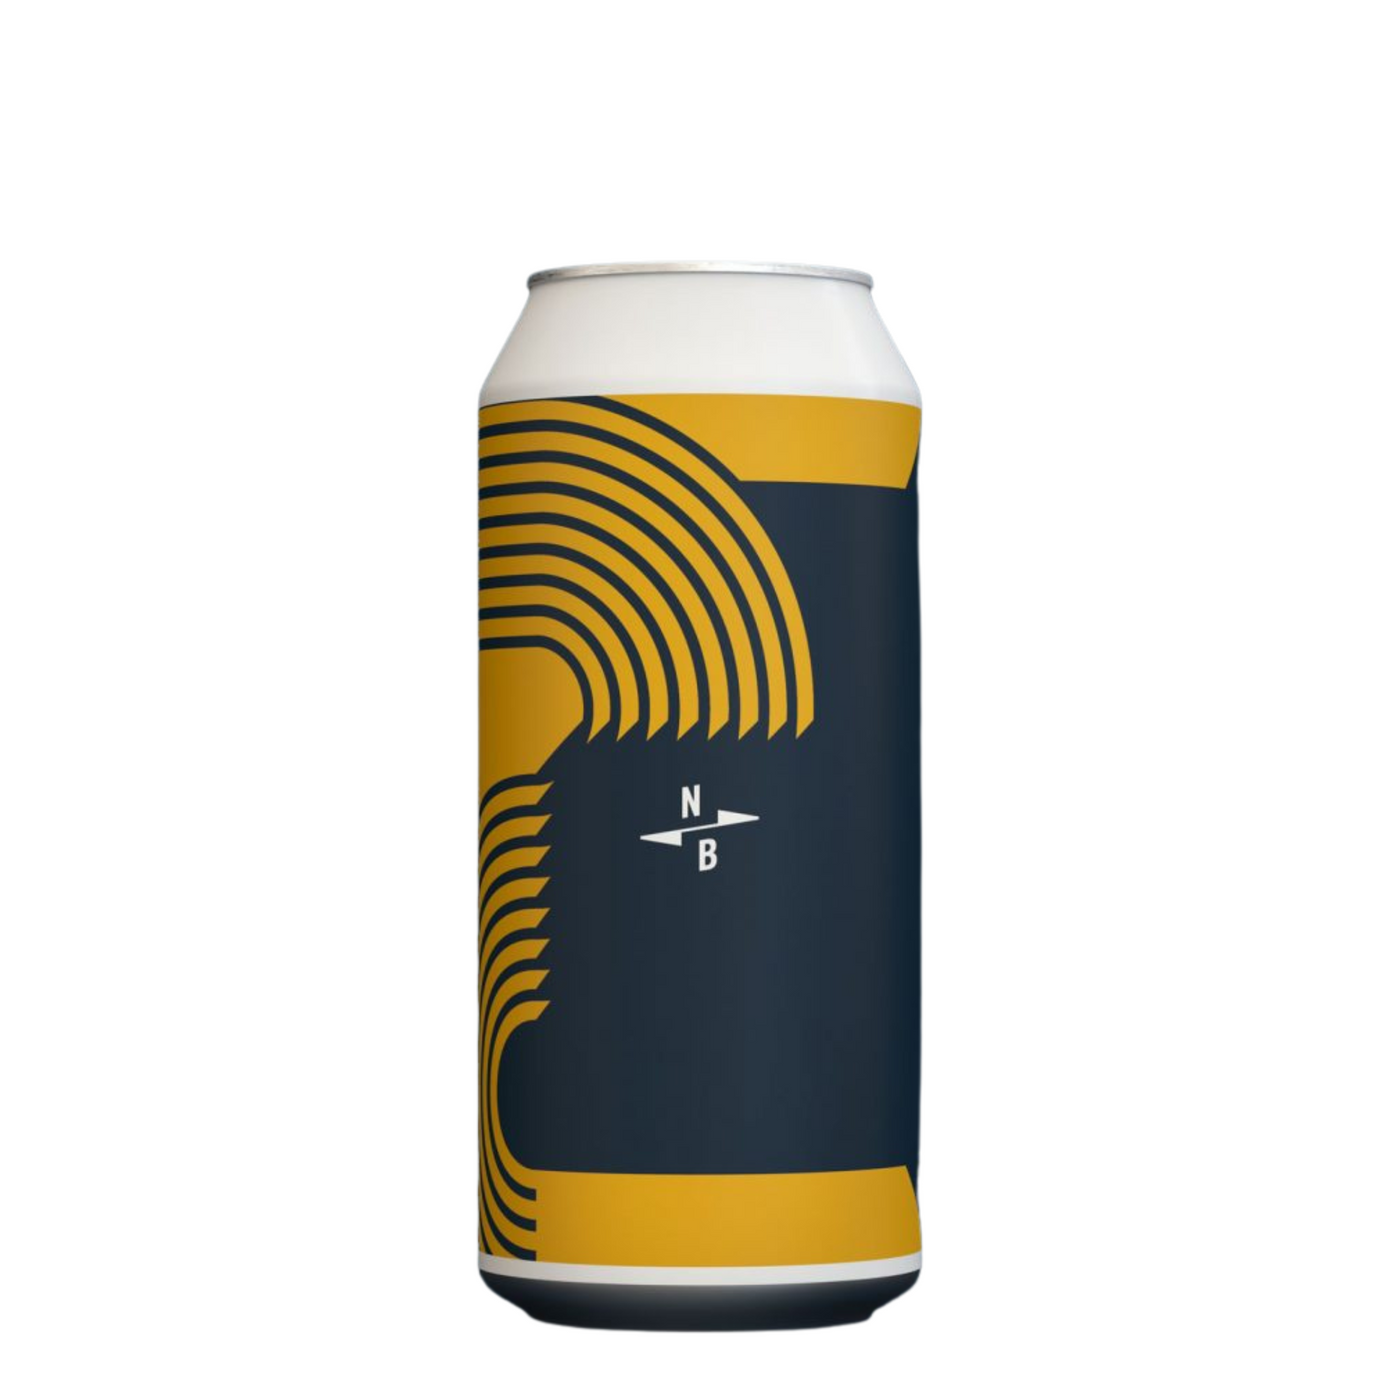 North Brewing Co x JW Lees Golden Ale 440ml